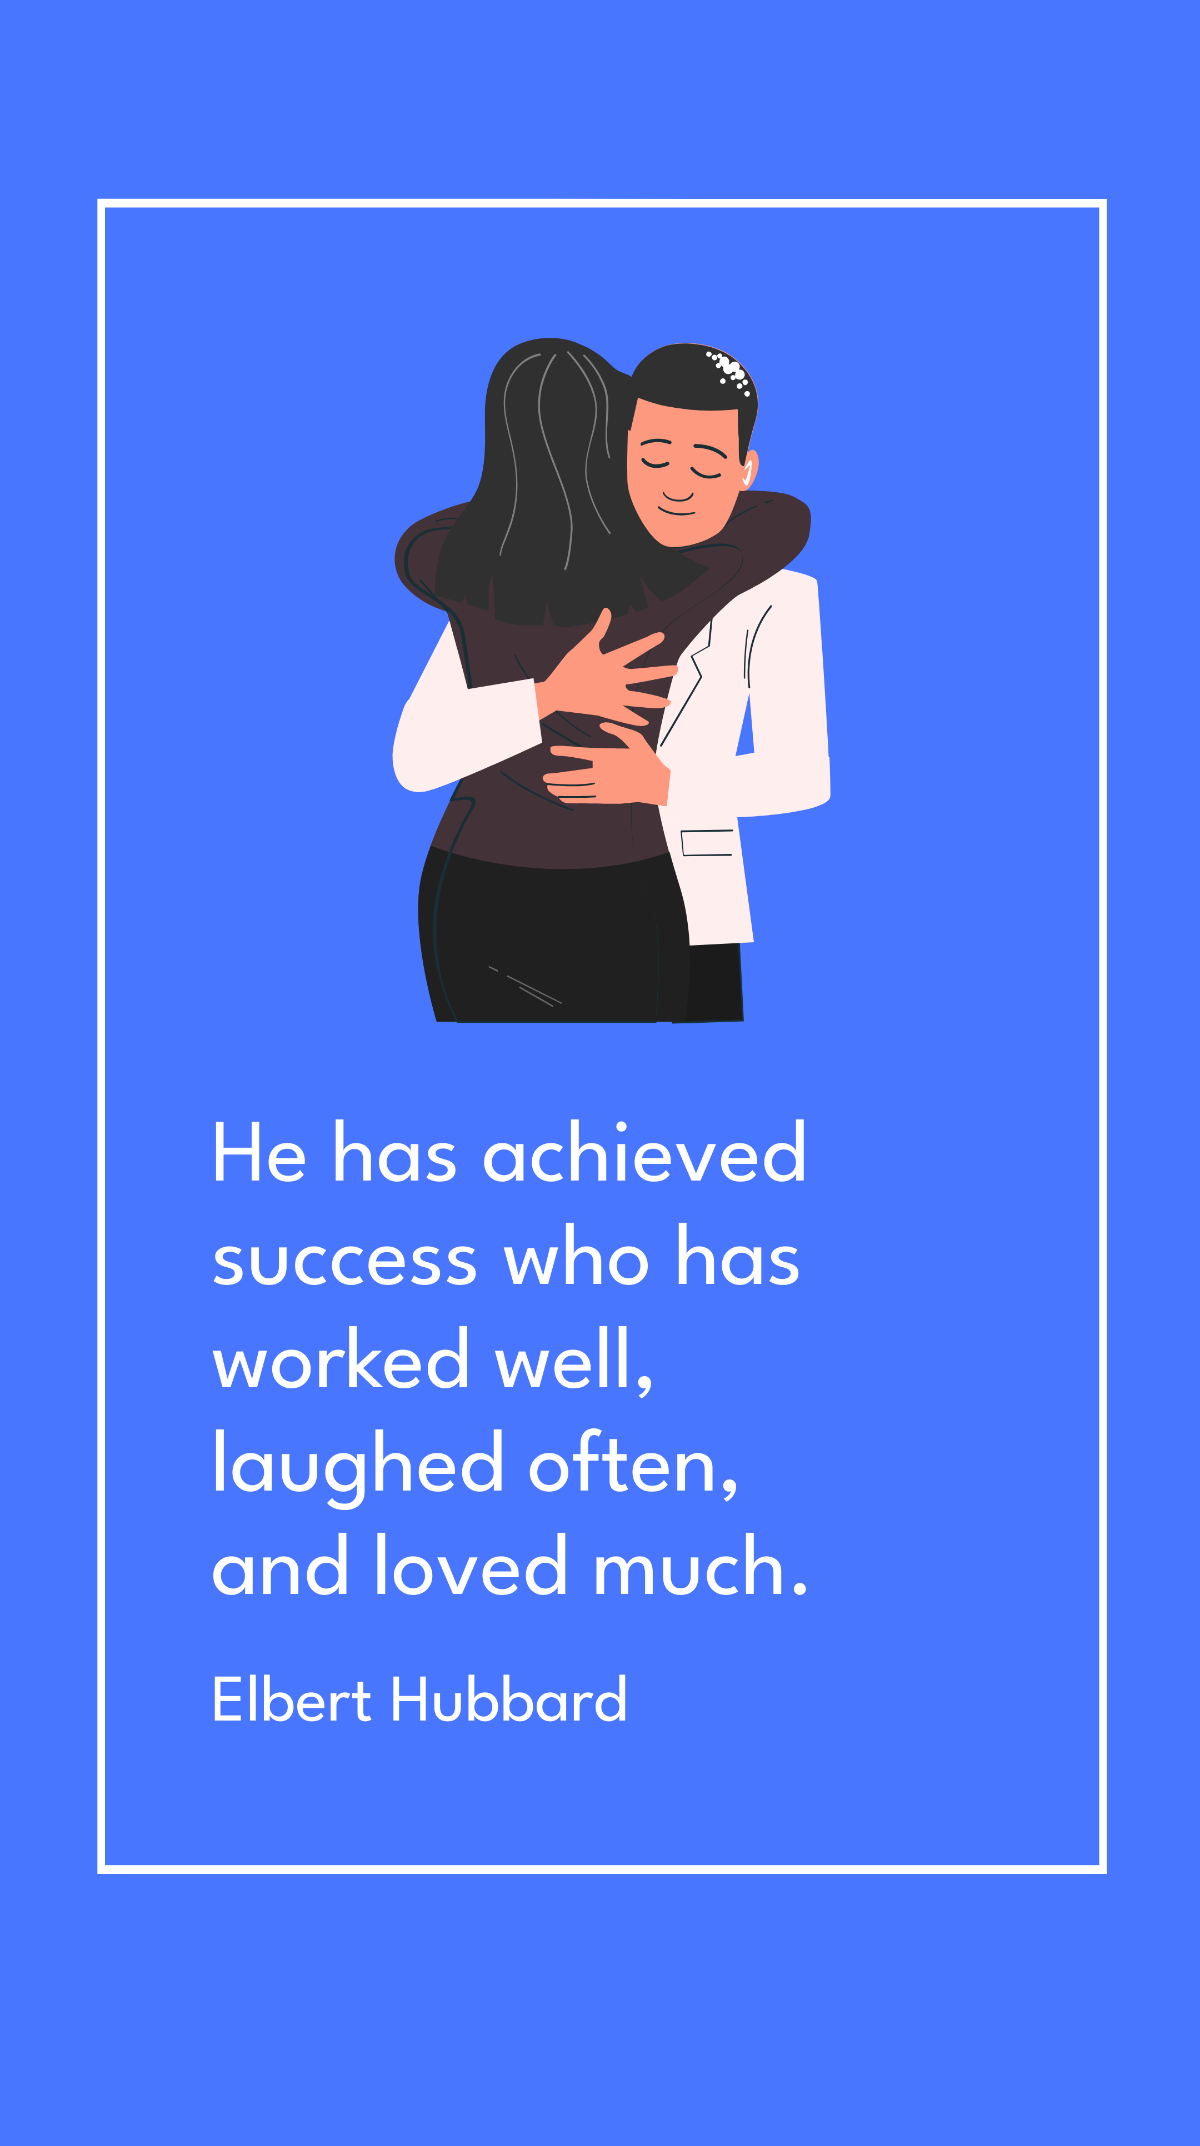 Free Elbert Hubbard - He has achieved success who has worked well, laughed often, and loved much. Template